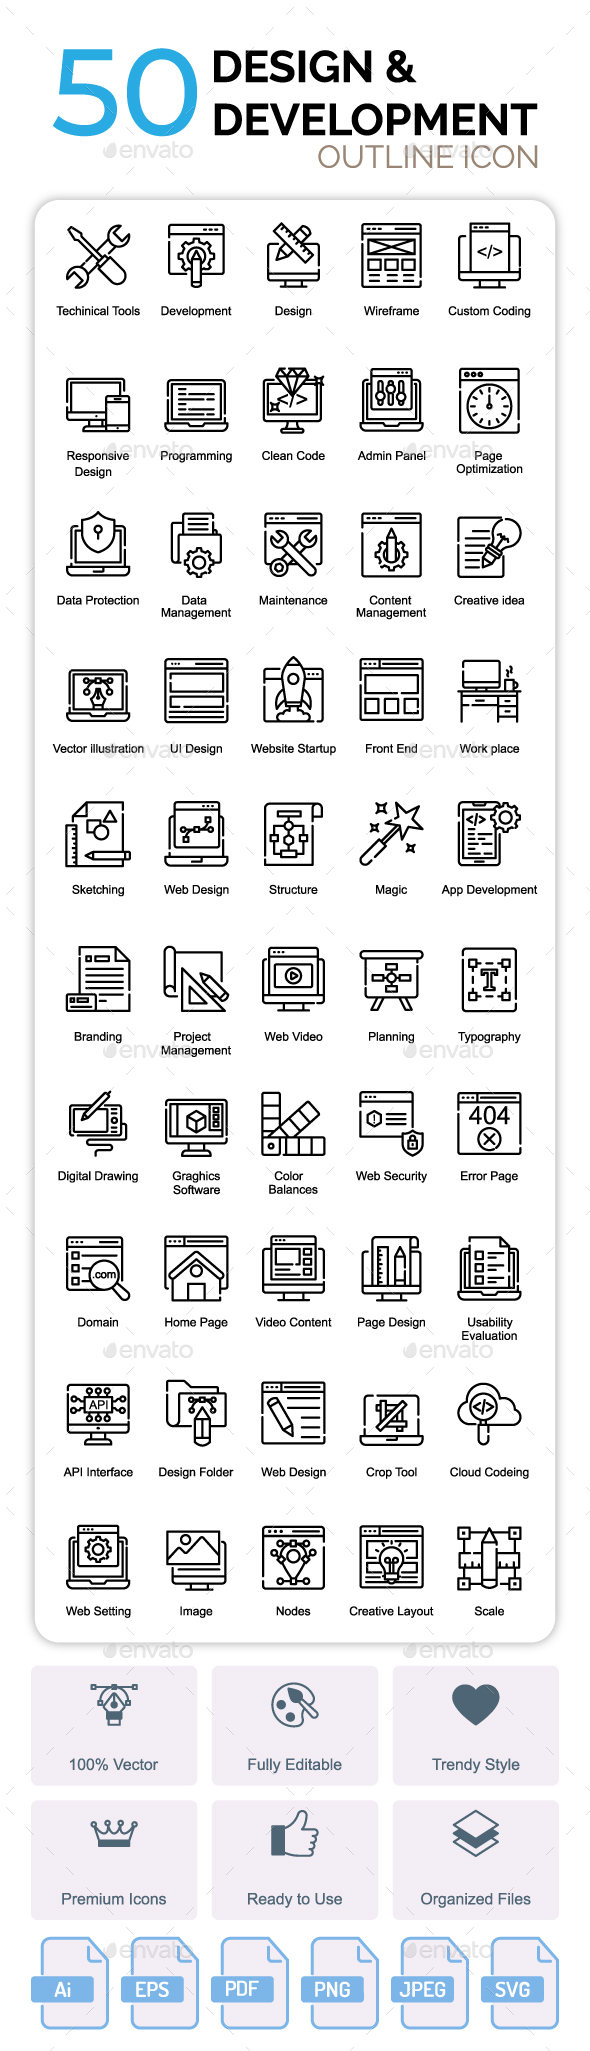 [DOWNLOAD]Design and Development Outline Icons Set